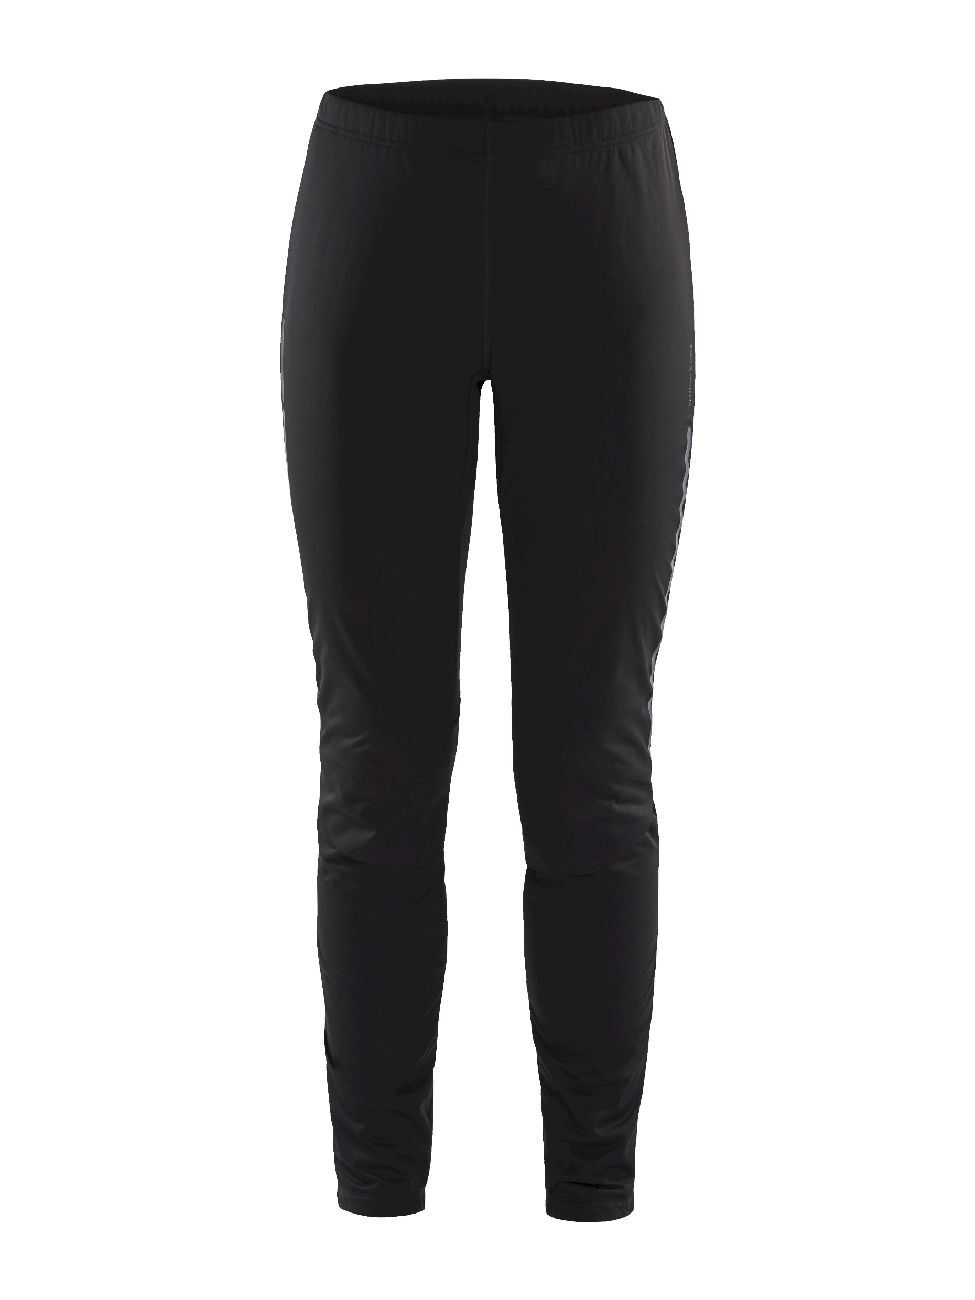 Craft ADV Nordic Training Tights - Cross-country ski trousers - Women's